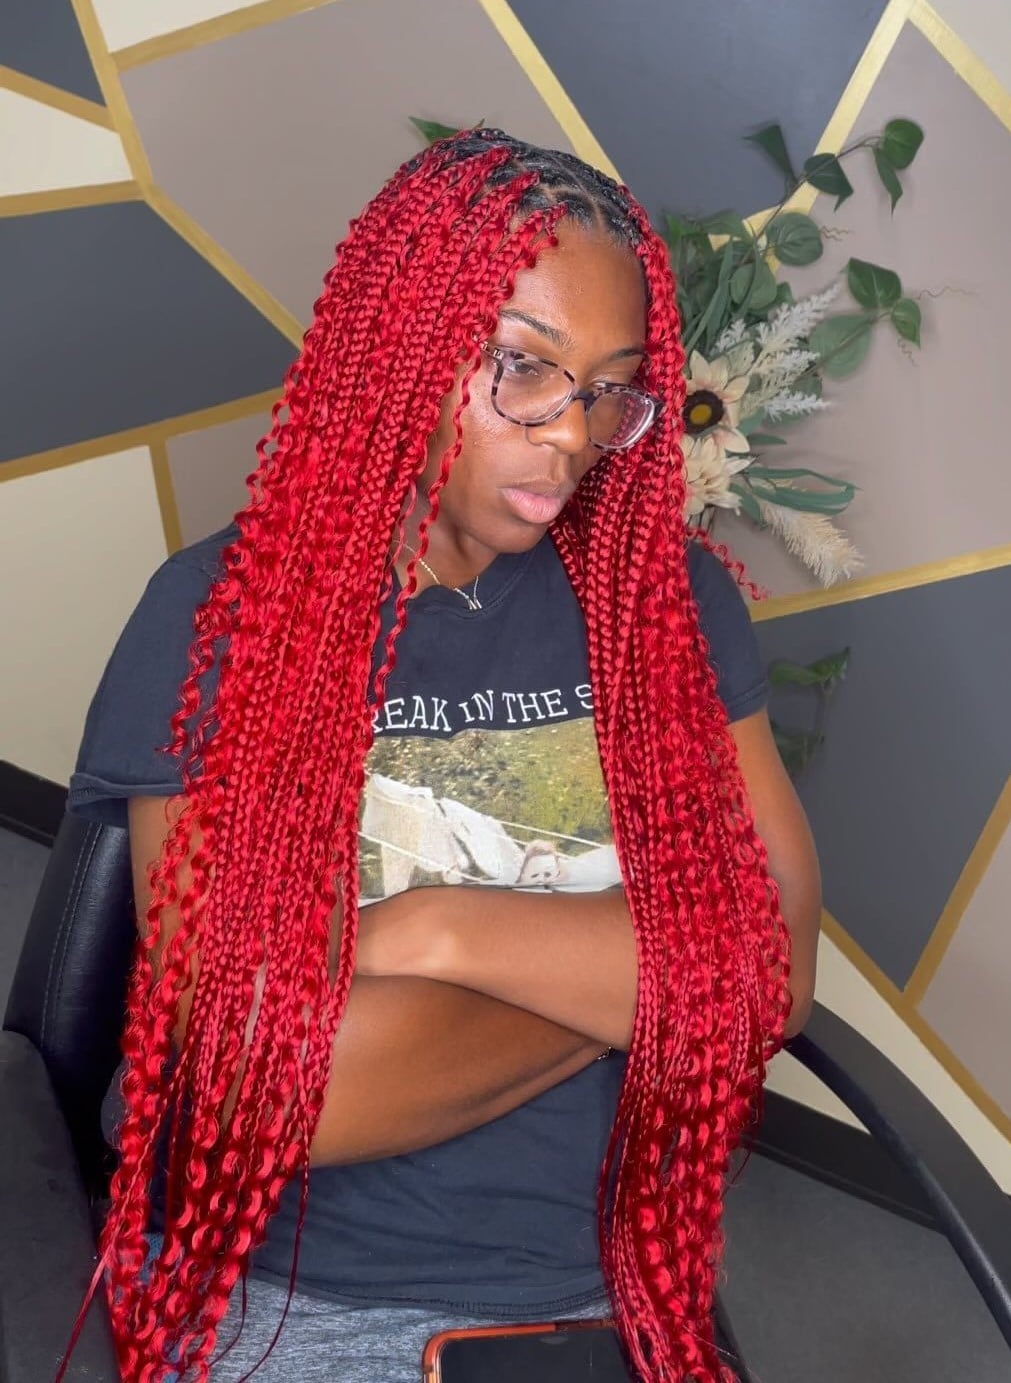 Image of Red Box Braids With Curls in the style of Braids With Curls